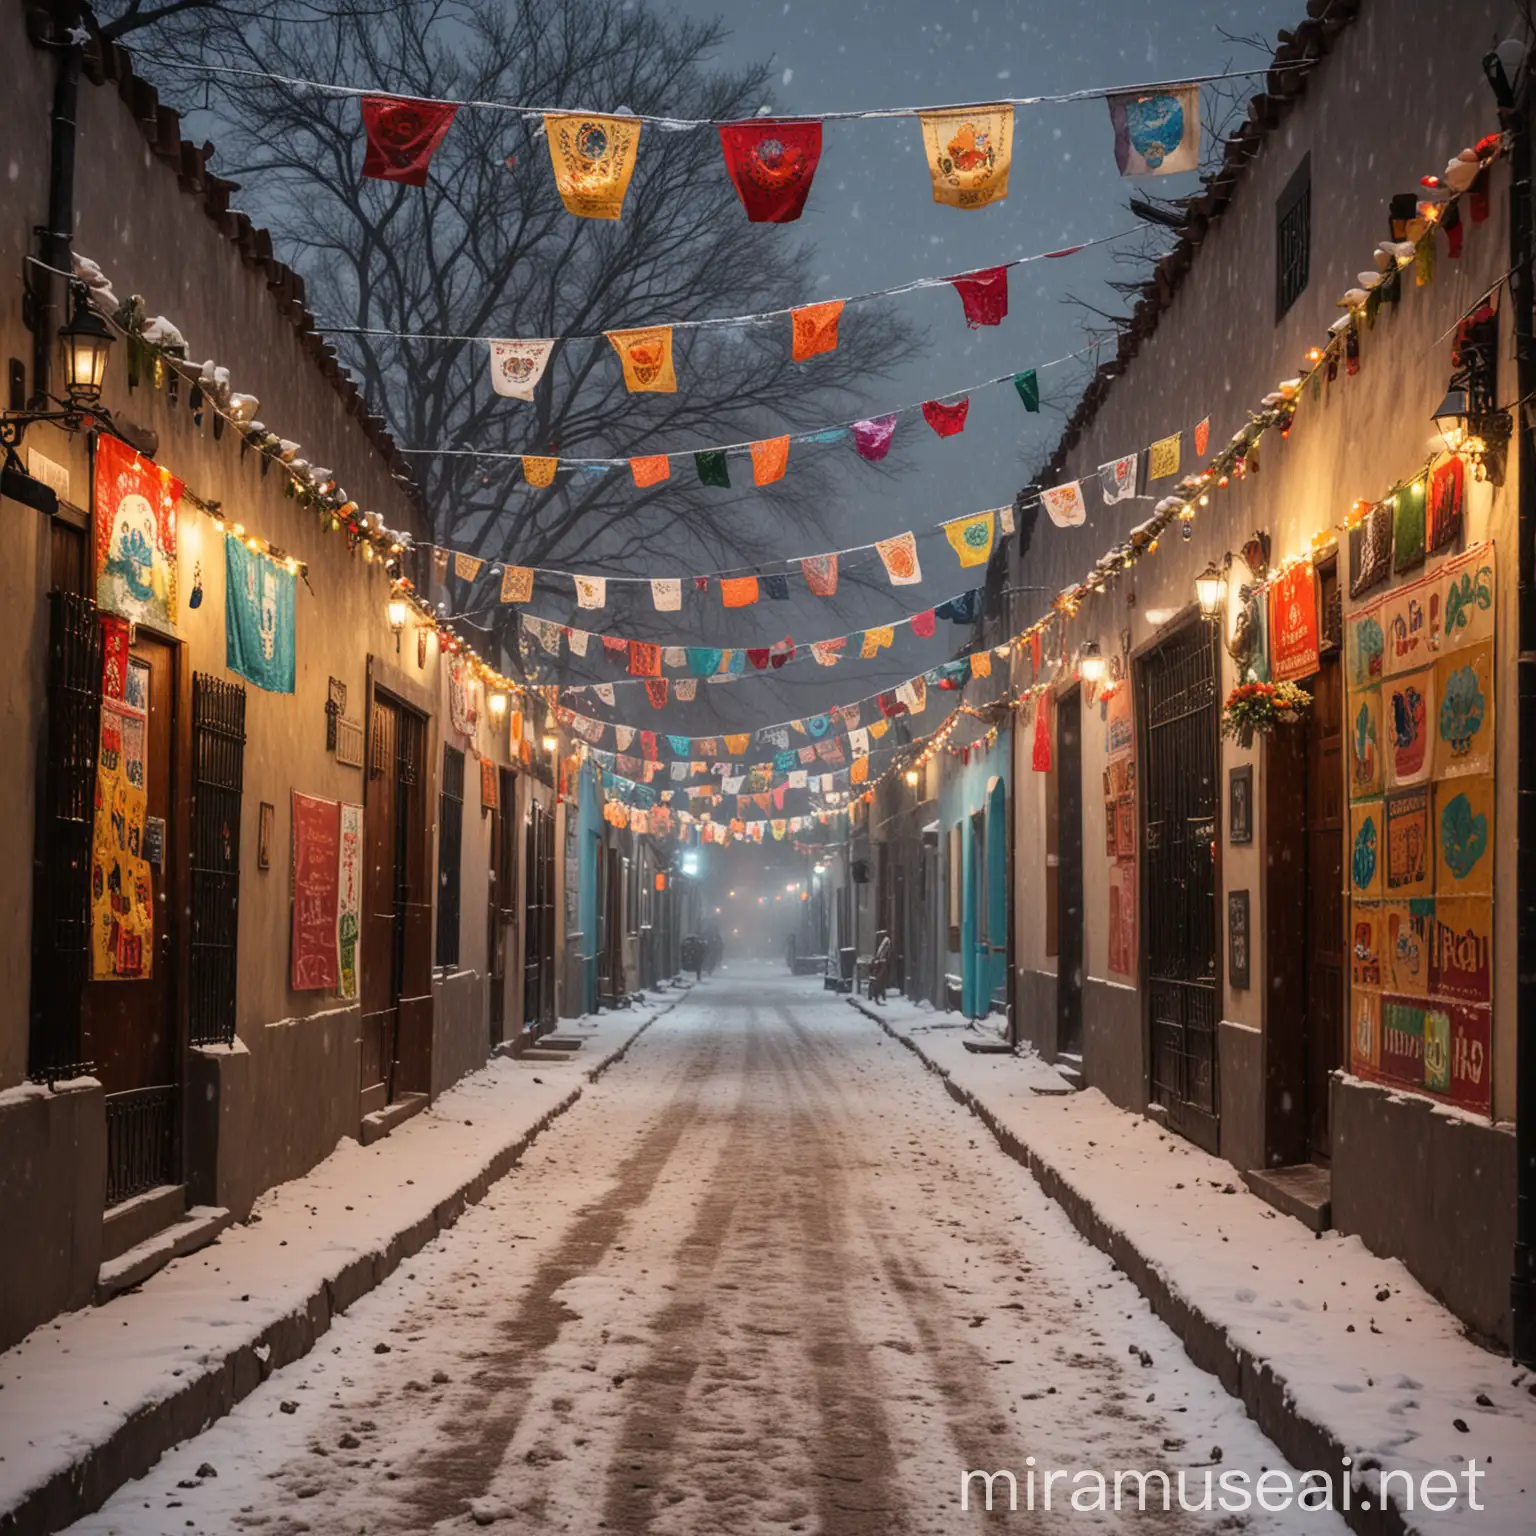 a traditional colonial Mexican street, with several taco sales all well lit with dia de los muertos flags during a snowfall